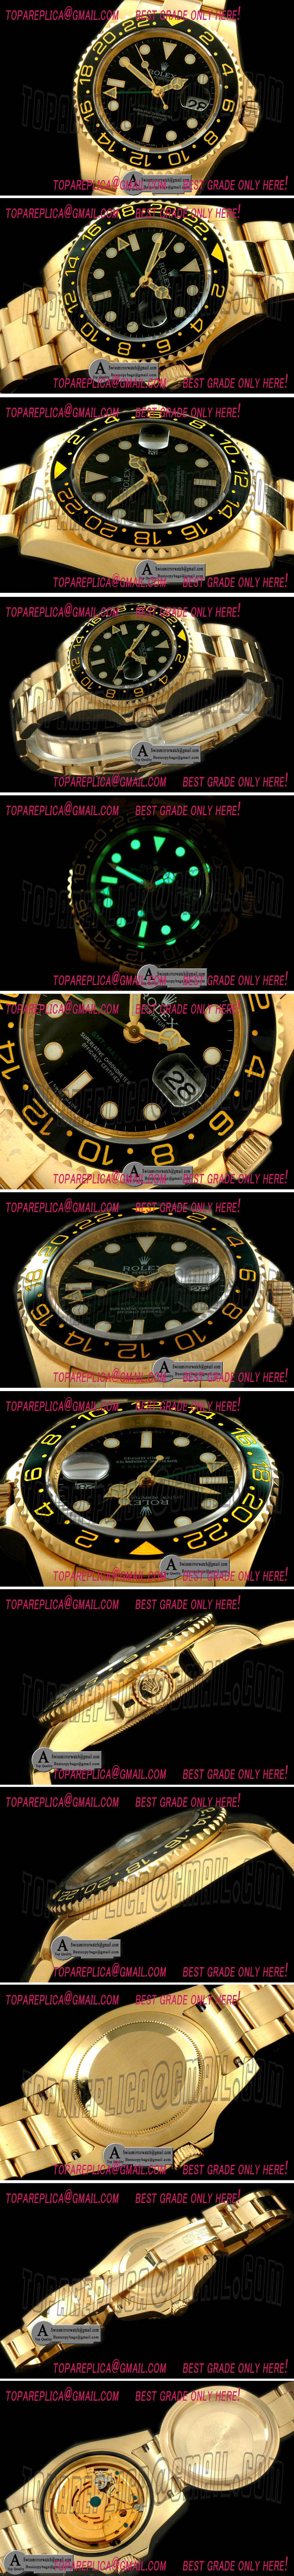 Rolex 116718 GMT Master Yellow Gold/Yellow Gold 2008 GMT Black Asian 2813 Replica Watches